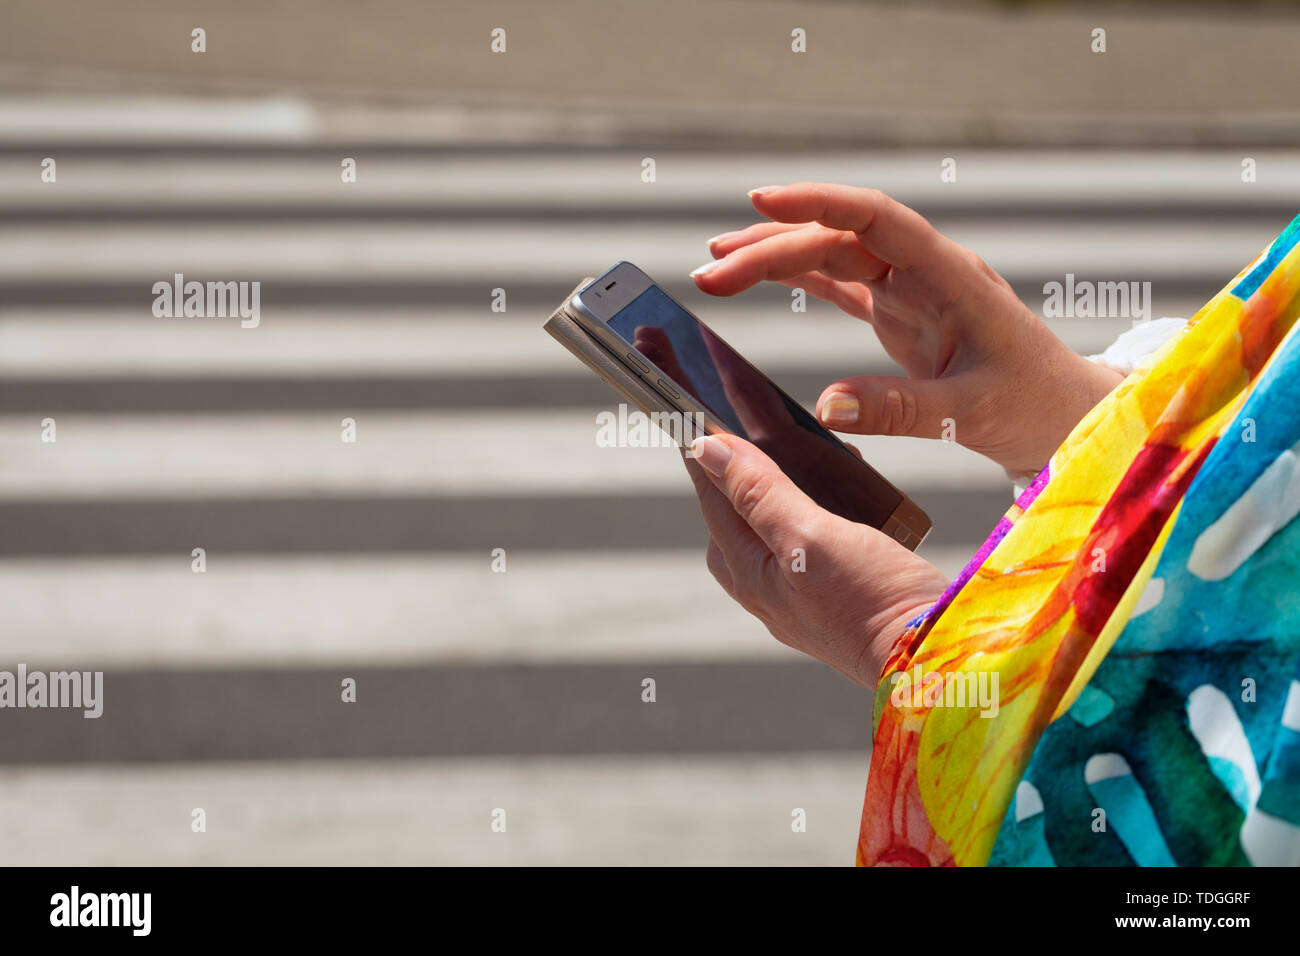 The woman, straring at the phone, crosses the streets / concept Stock Photo